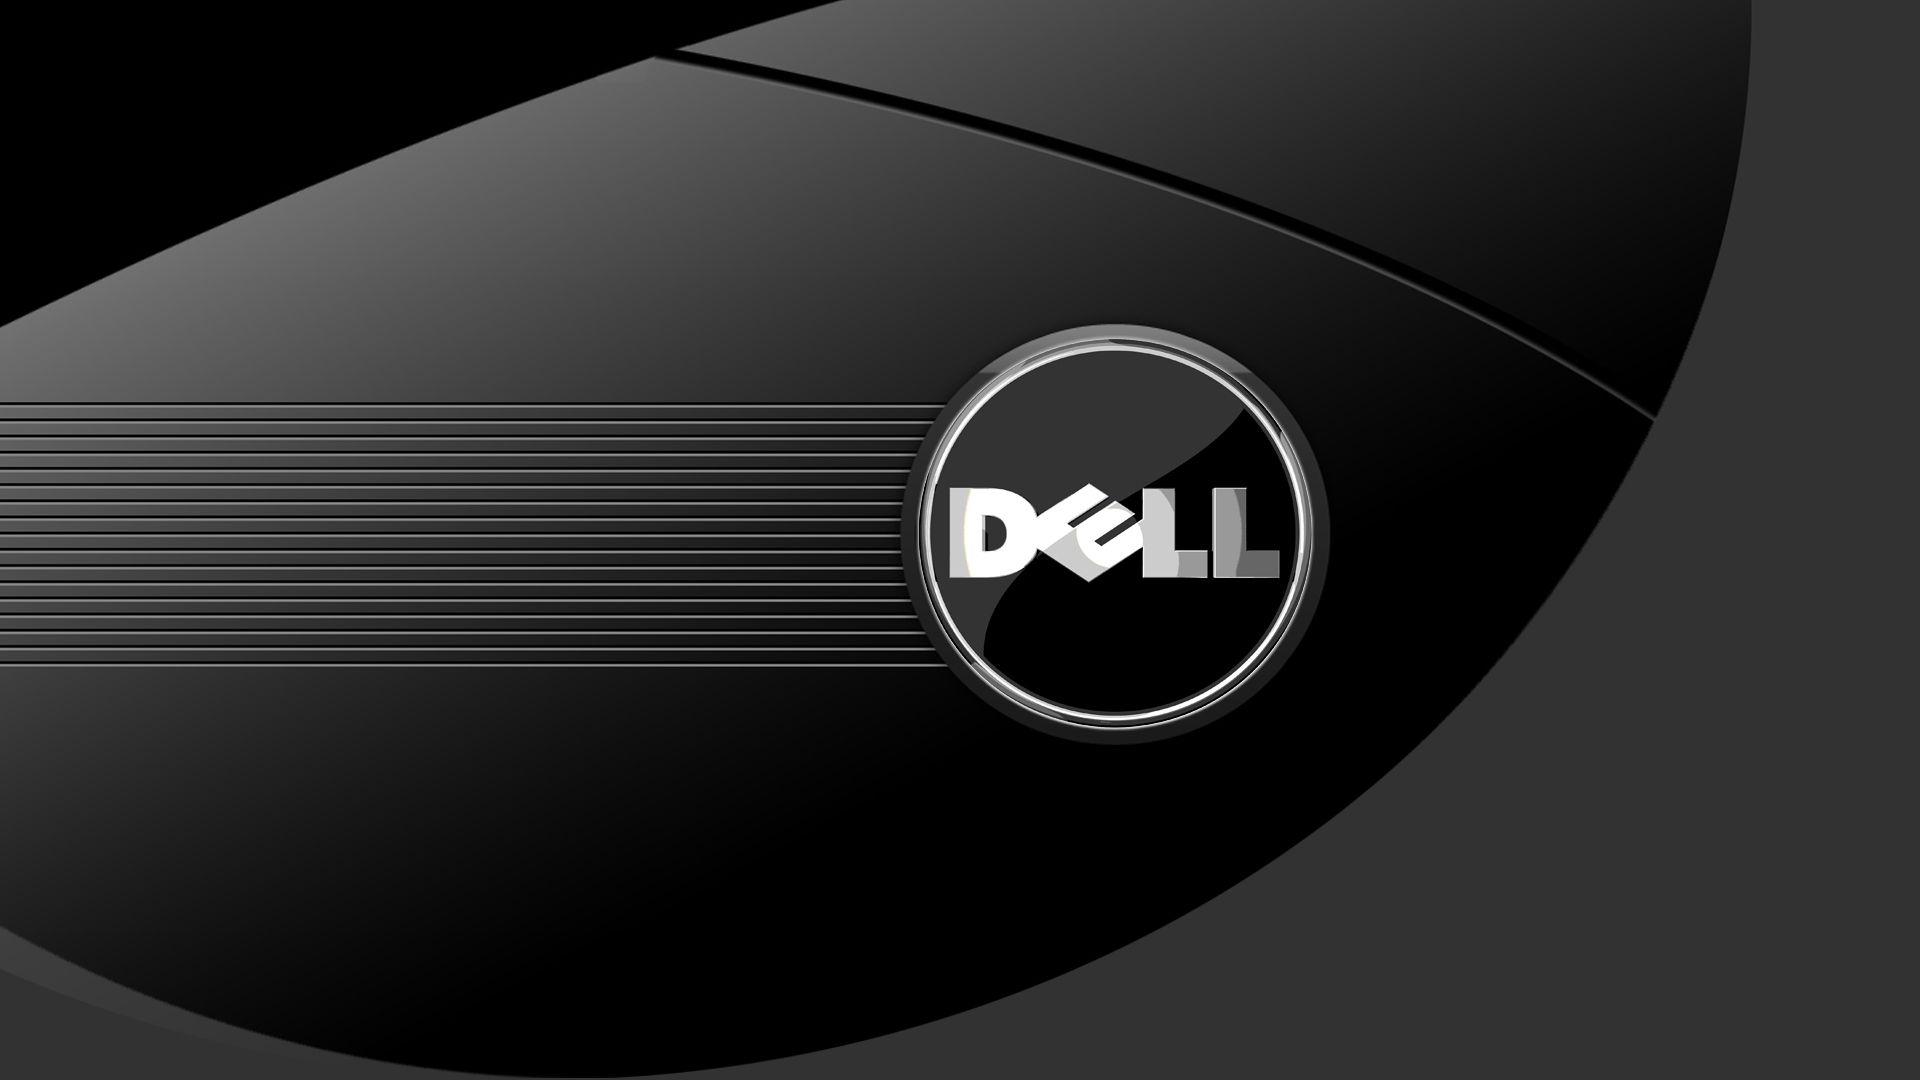 Dell XPS 13 4K Wallpapers - Top Free